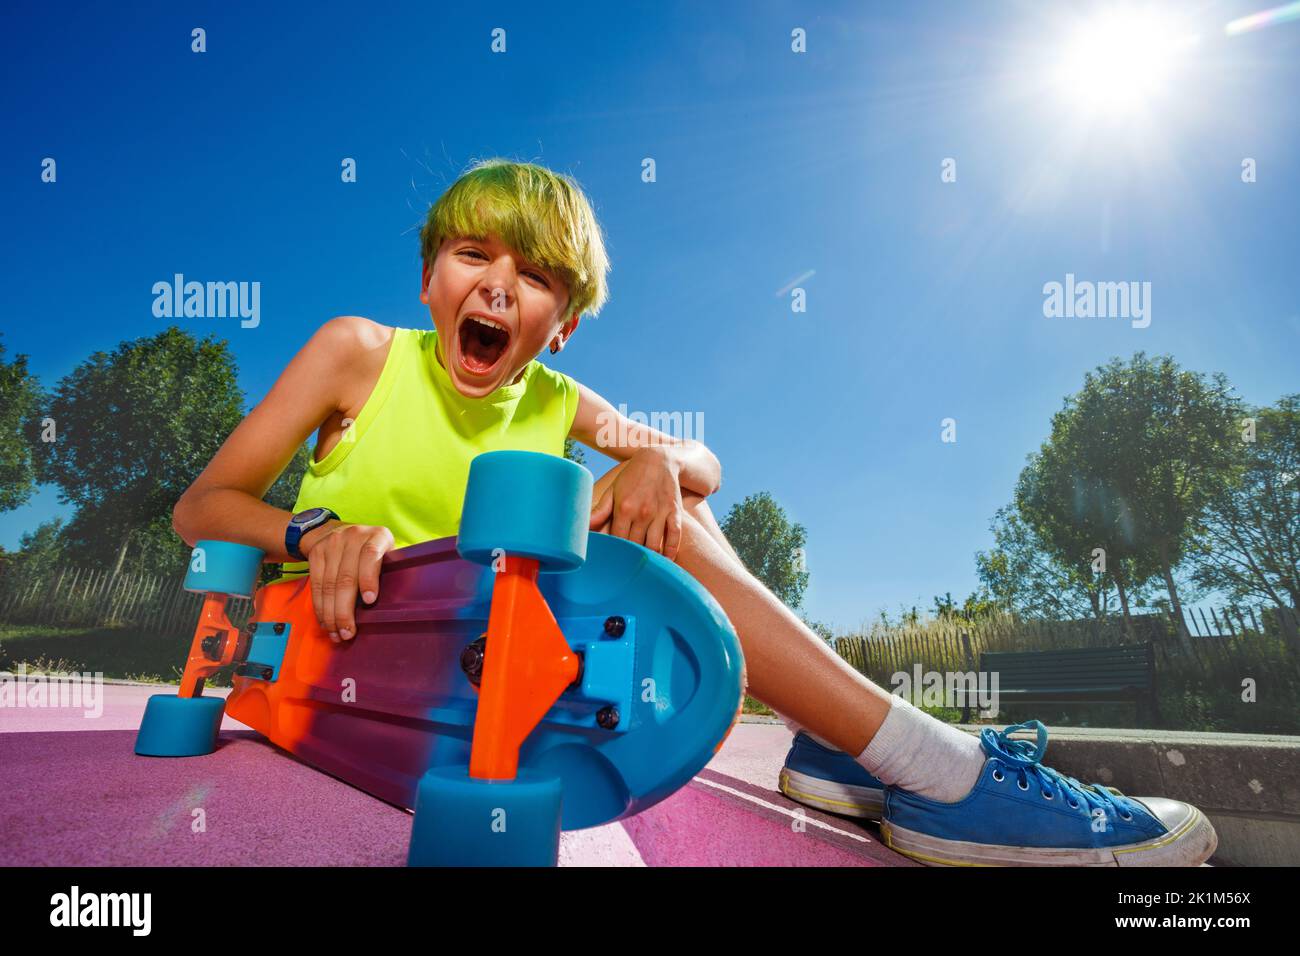 Happy screaming boy with skateboard and green hair sit on a ramp Stock Photo